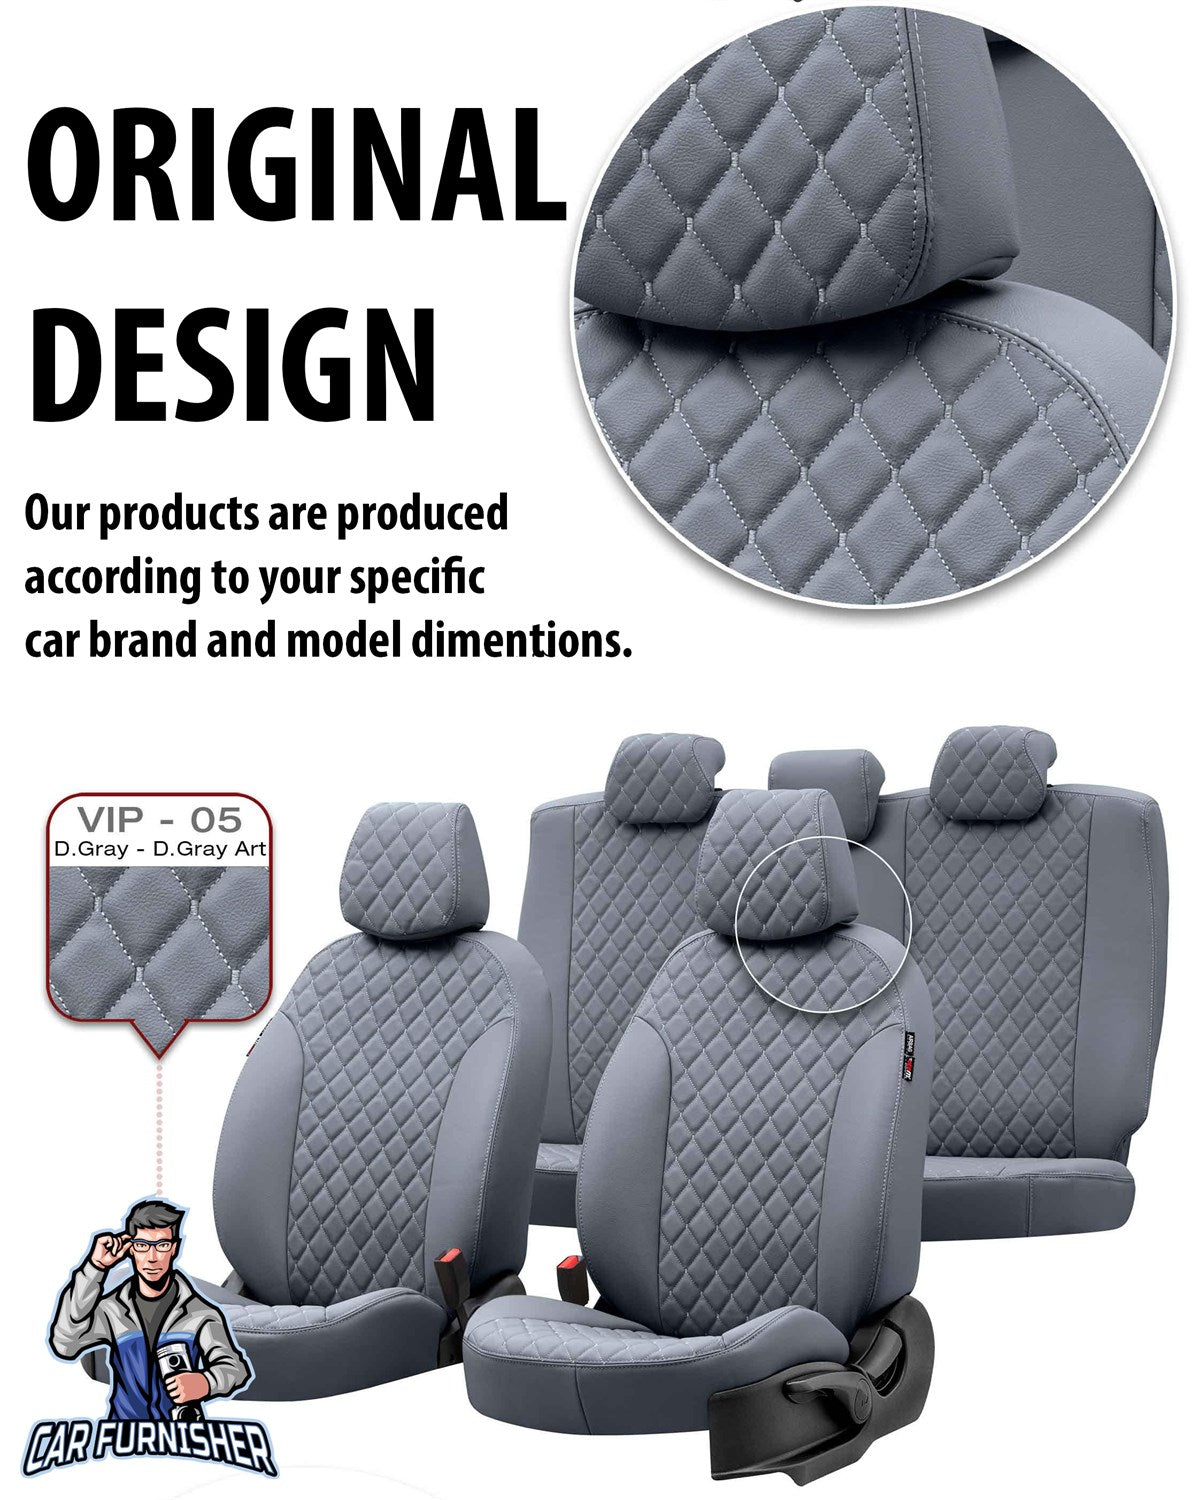 Jeep Renegade Seat Covers Madrid Leather Design Red Leather